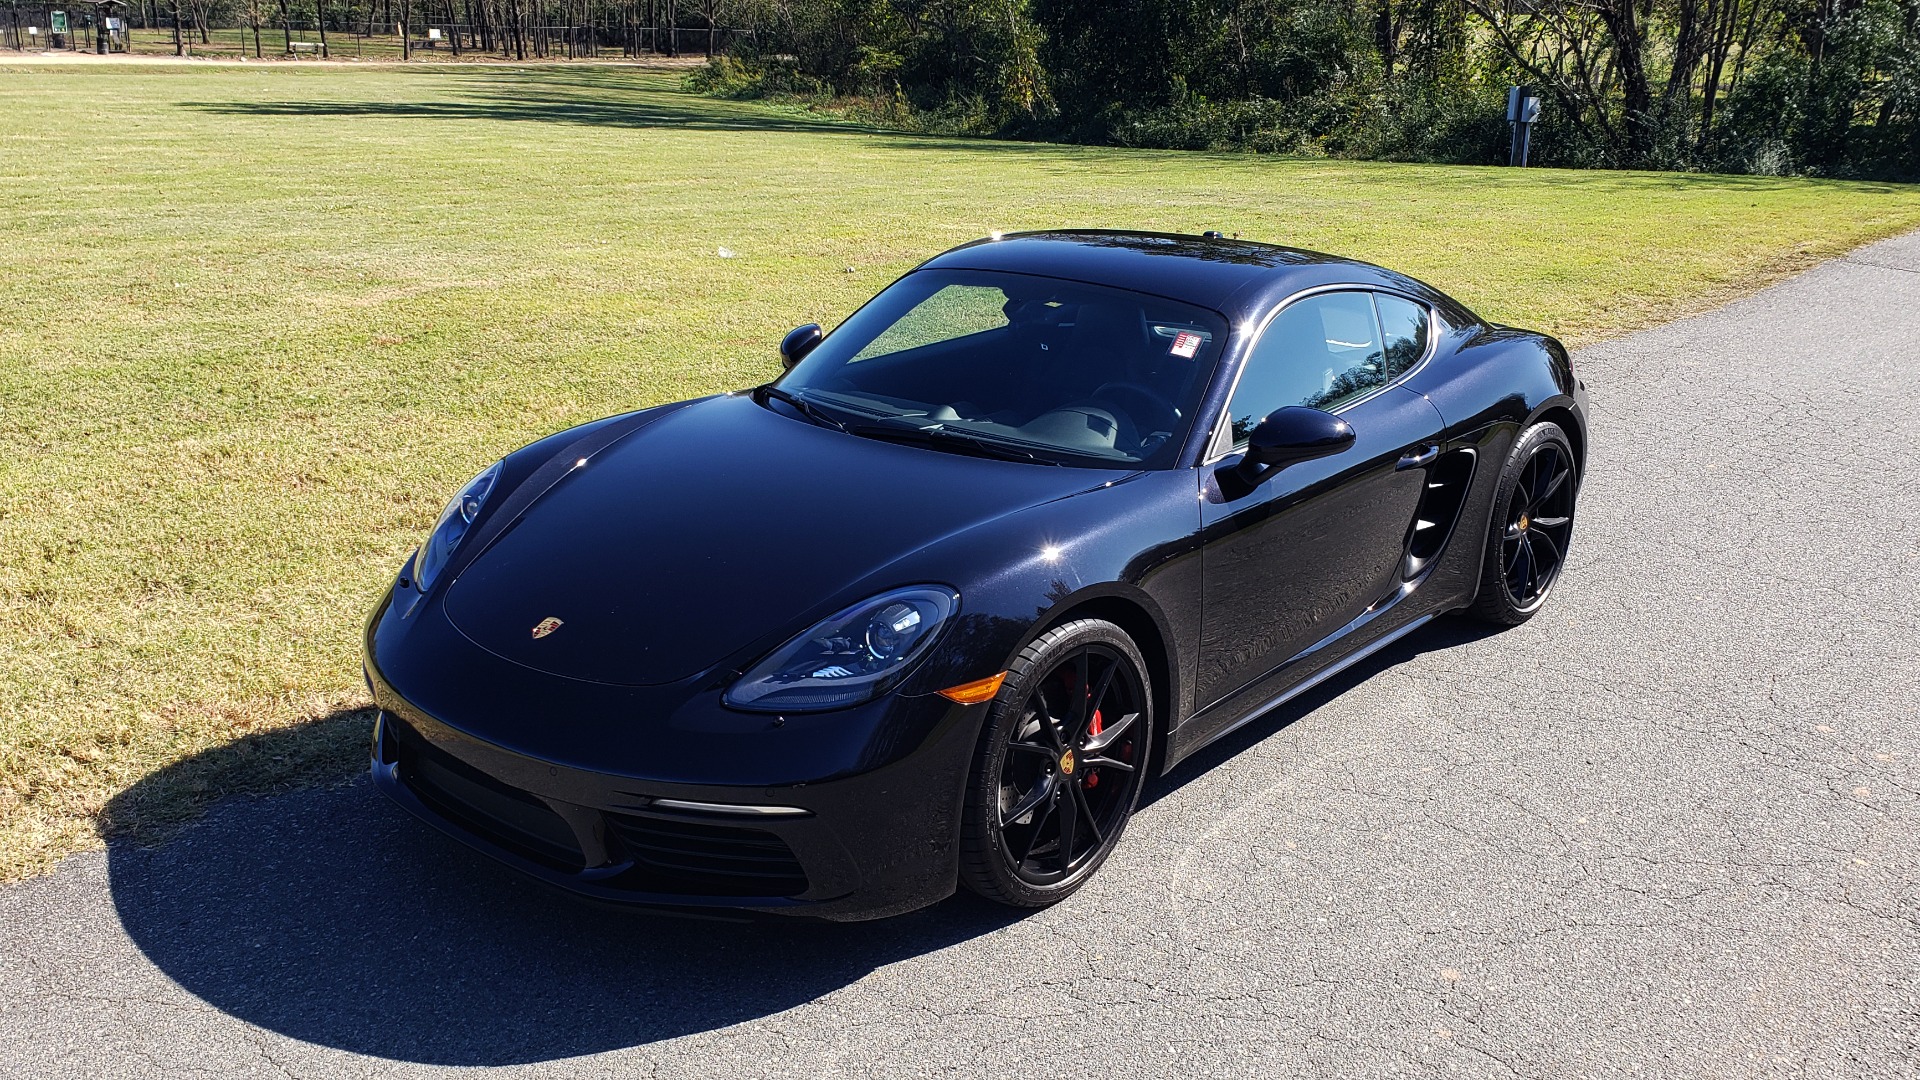 Used 2019 Porsche 718 CAYMAN S COUPE / PDK TRANS / LCA / BOSE / HTD STS / LIGHT DESIGN PKG for sale Sold at Formula Imports in Charlotte NC 28227 3